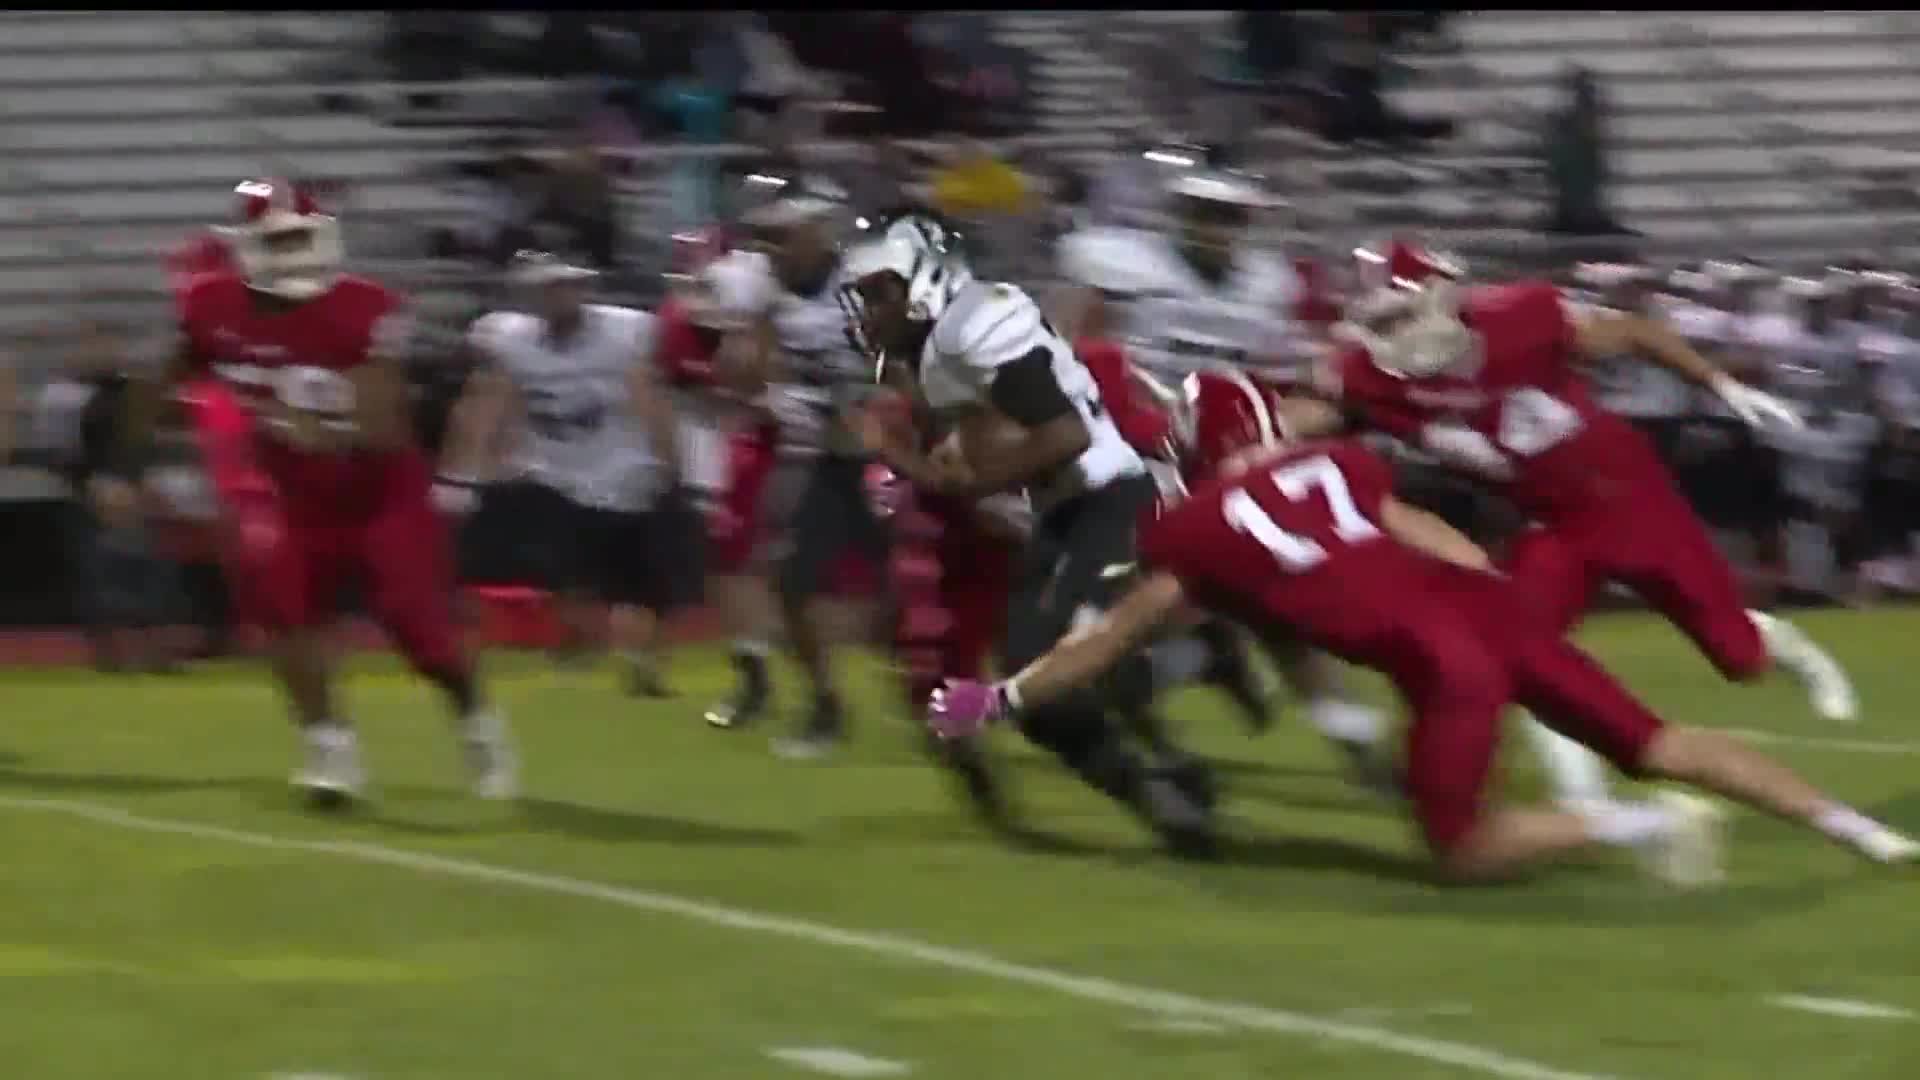 HSFF 2019 week 9 Central Dauphin East at Cumberland Valley highlights